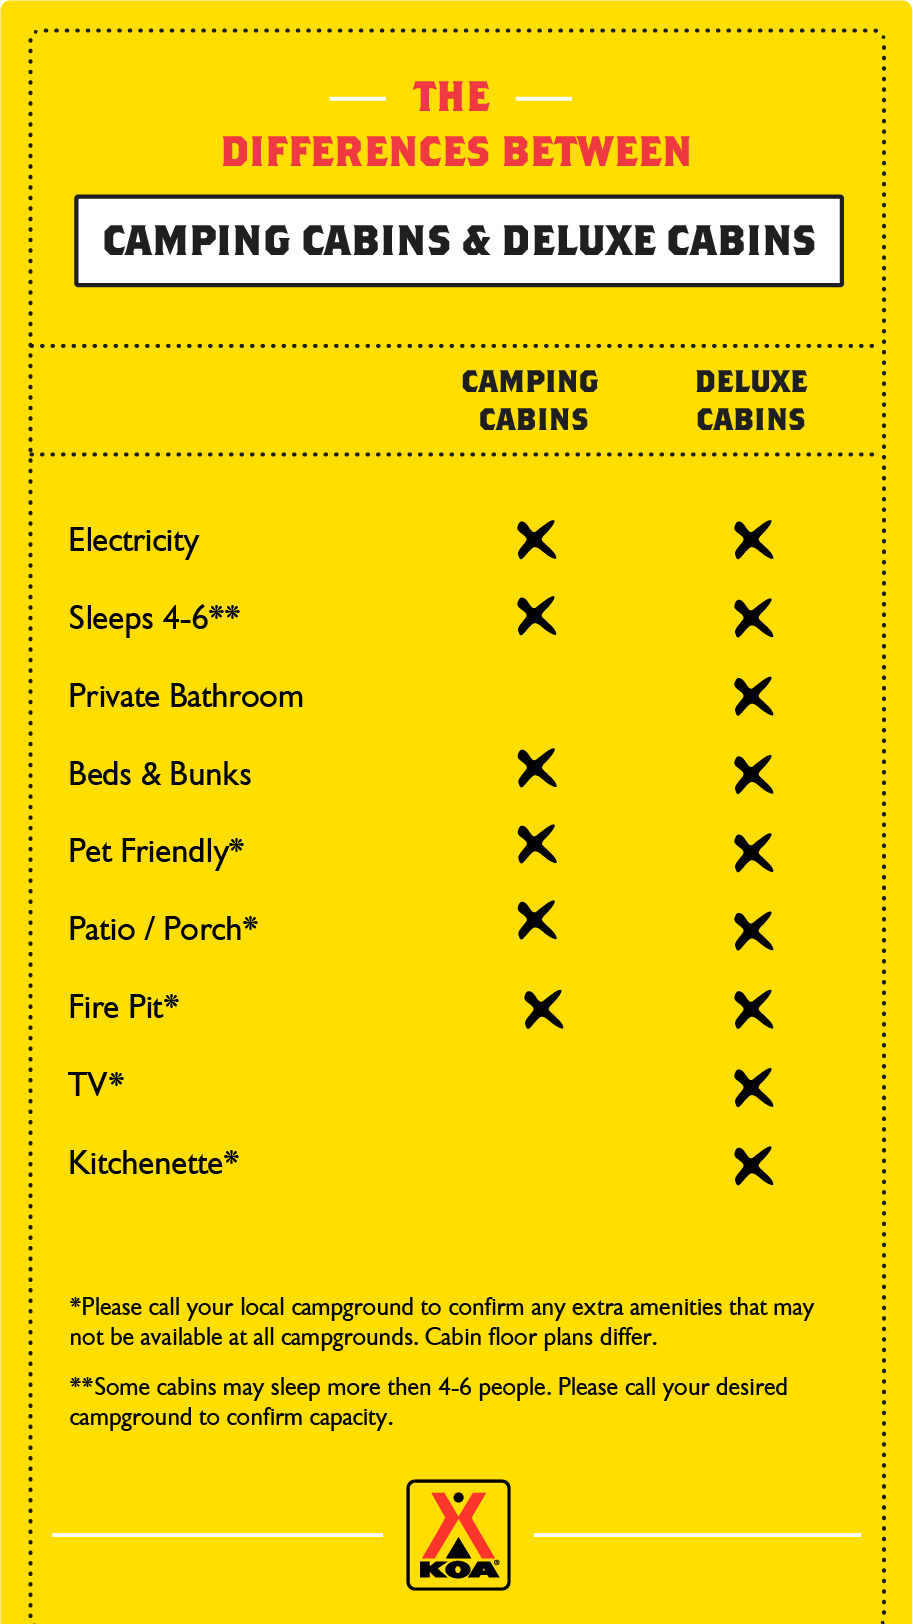 Differences Between Camping Cabins & Deluxe Cabins